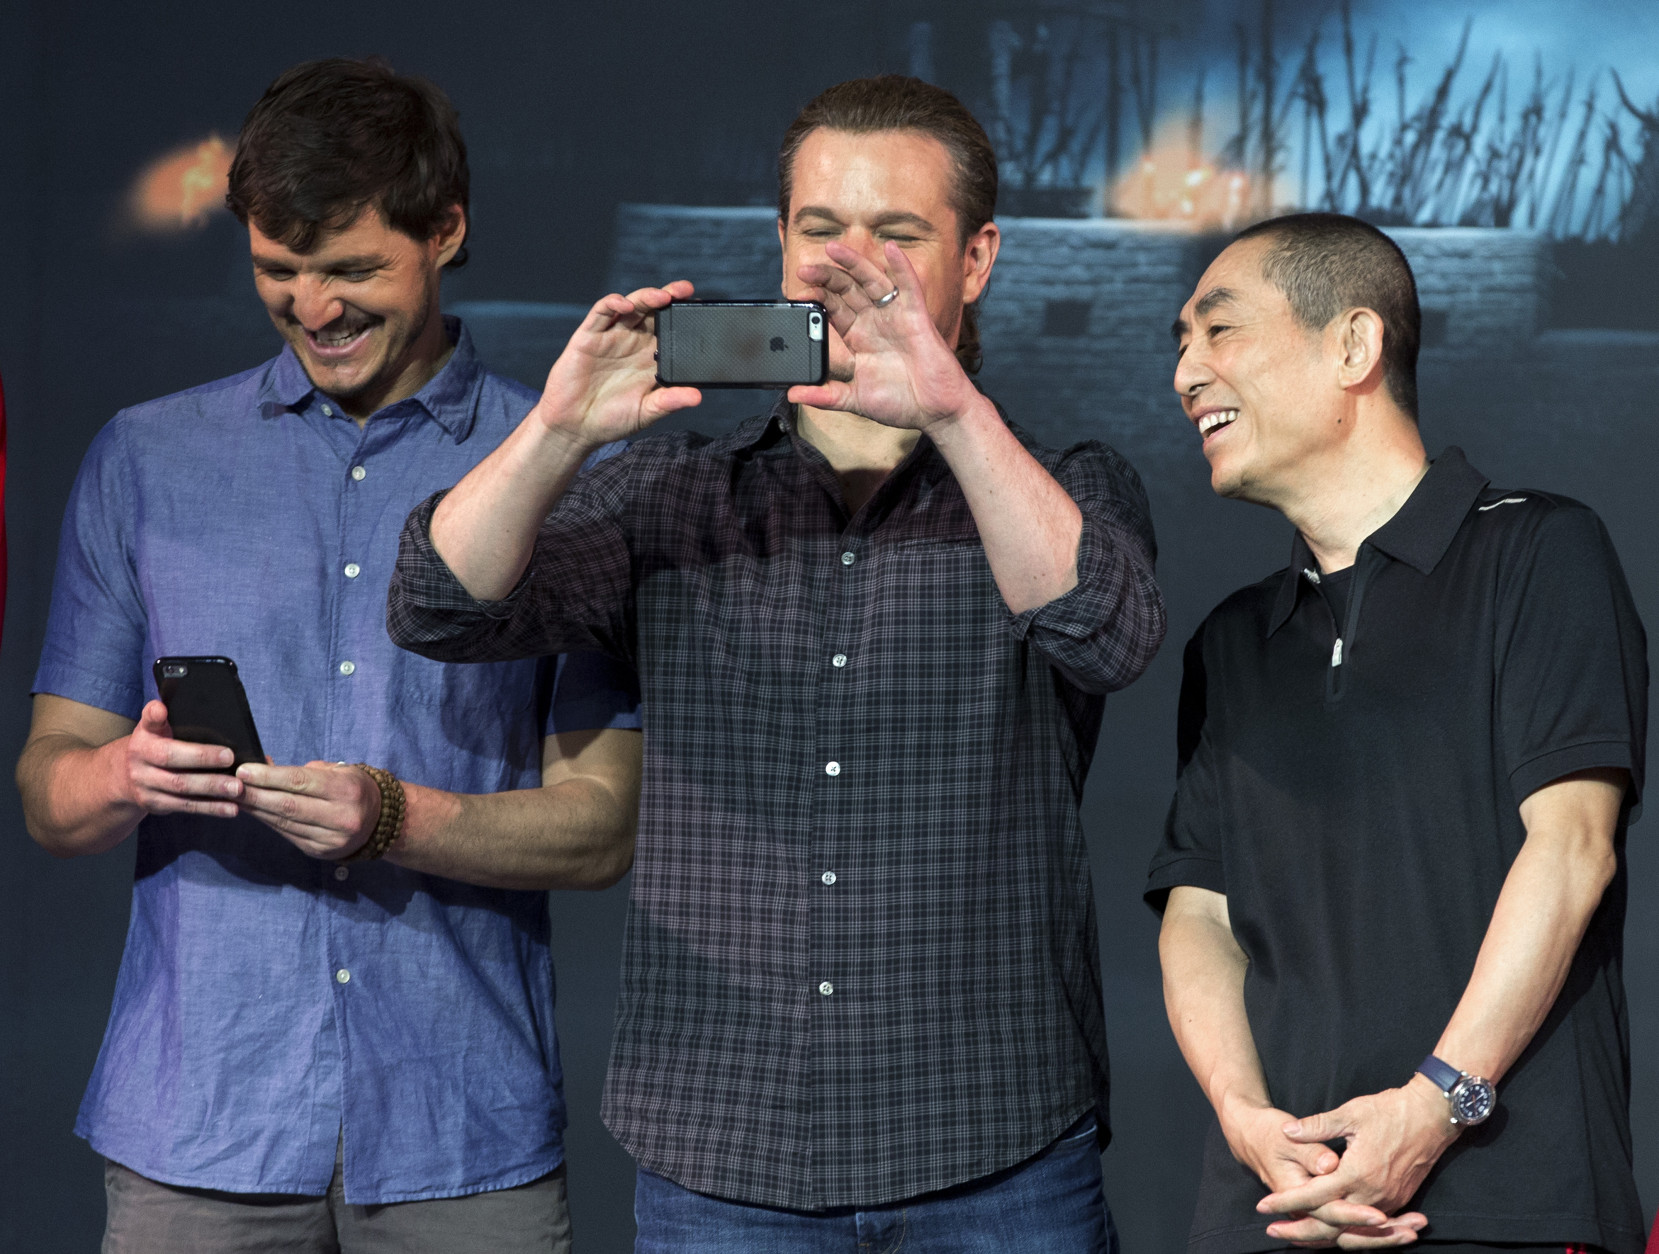 Director Zhang Yimou, right, looks at actor Matt Damon, center, using a mobile phone to take picture of the journalists next to actor Pedro Pascal, second from right, during a press conference for their latest movie The Great Wall held at a hotel in Beijing, China, Thursday, July 2, 2015. (AP Photo/Andy Wong)